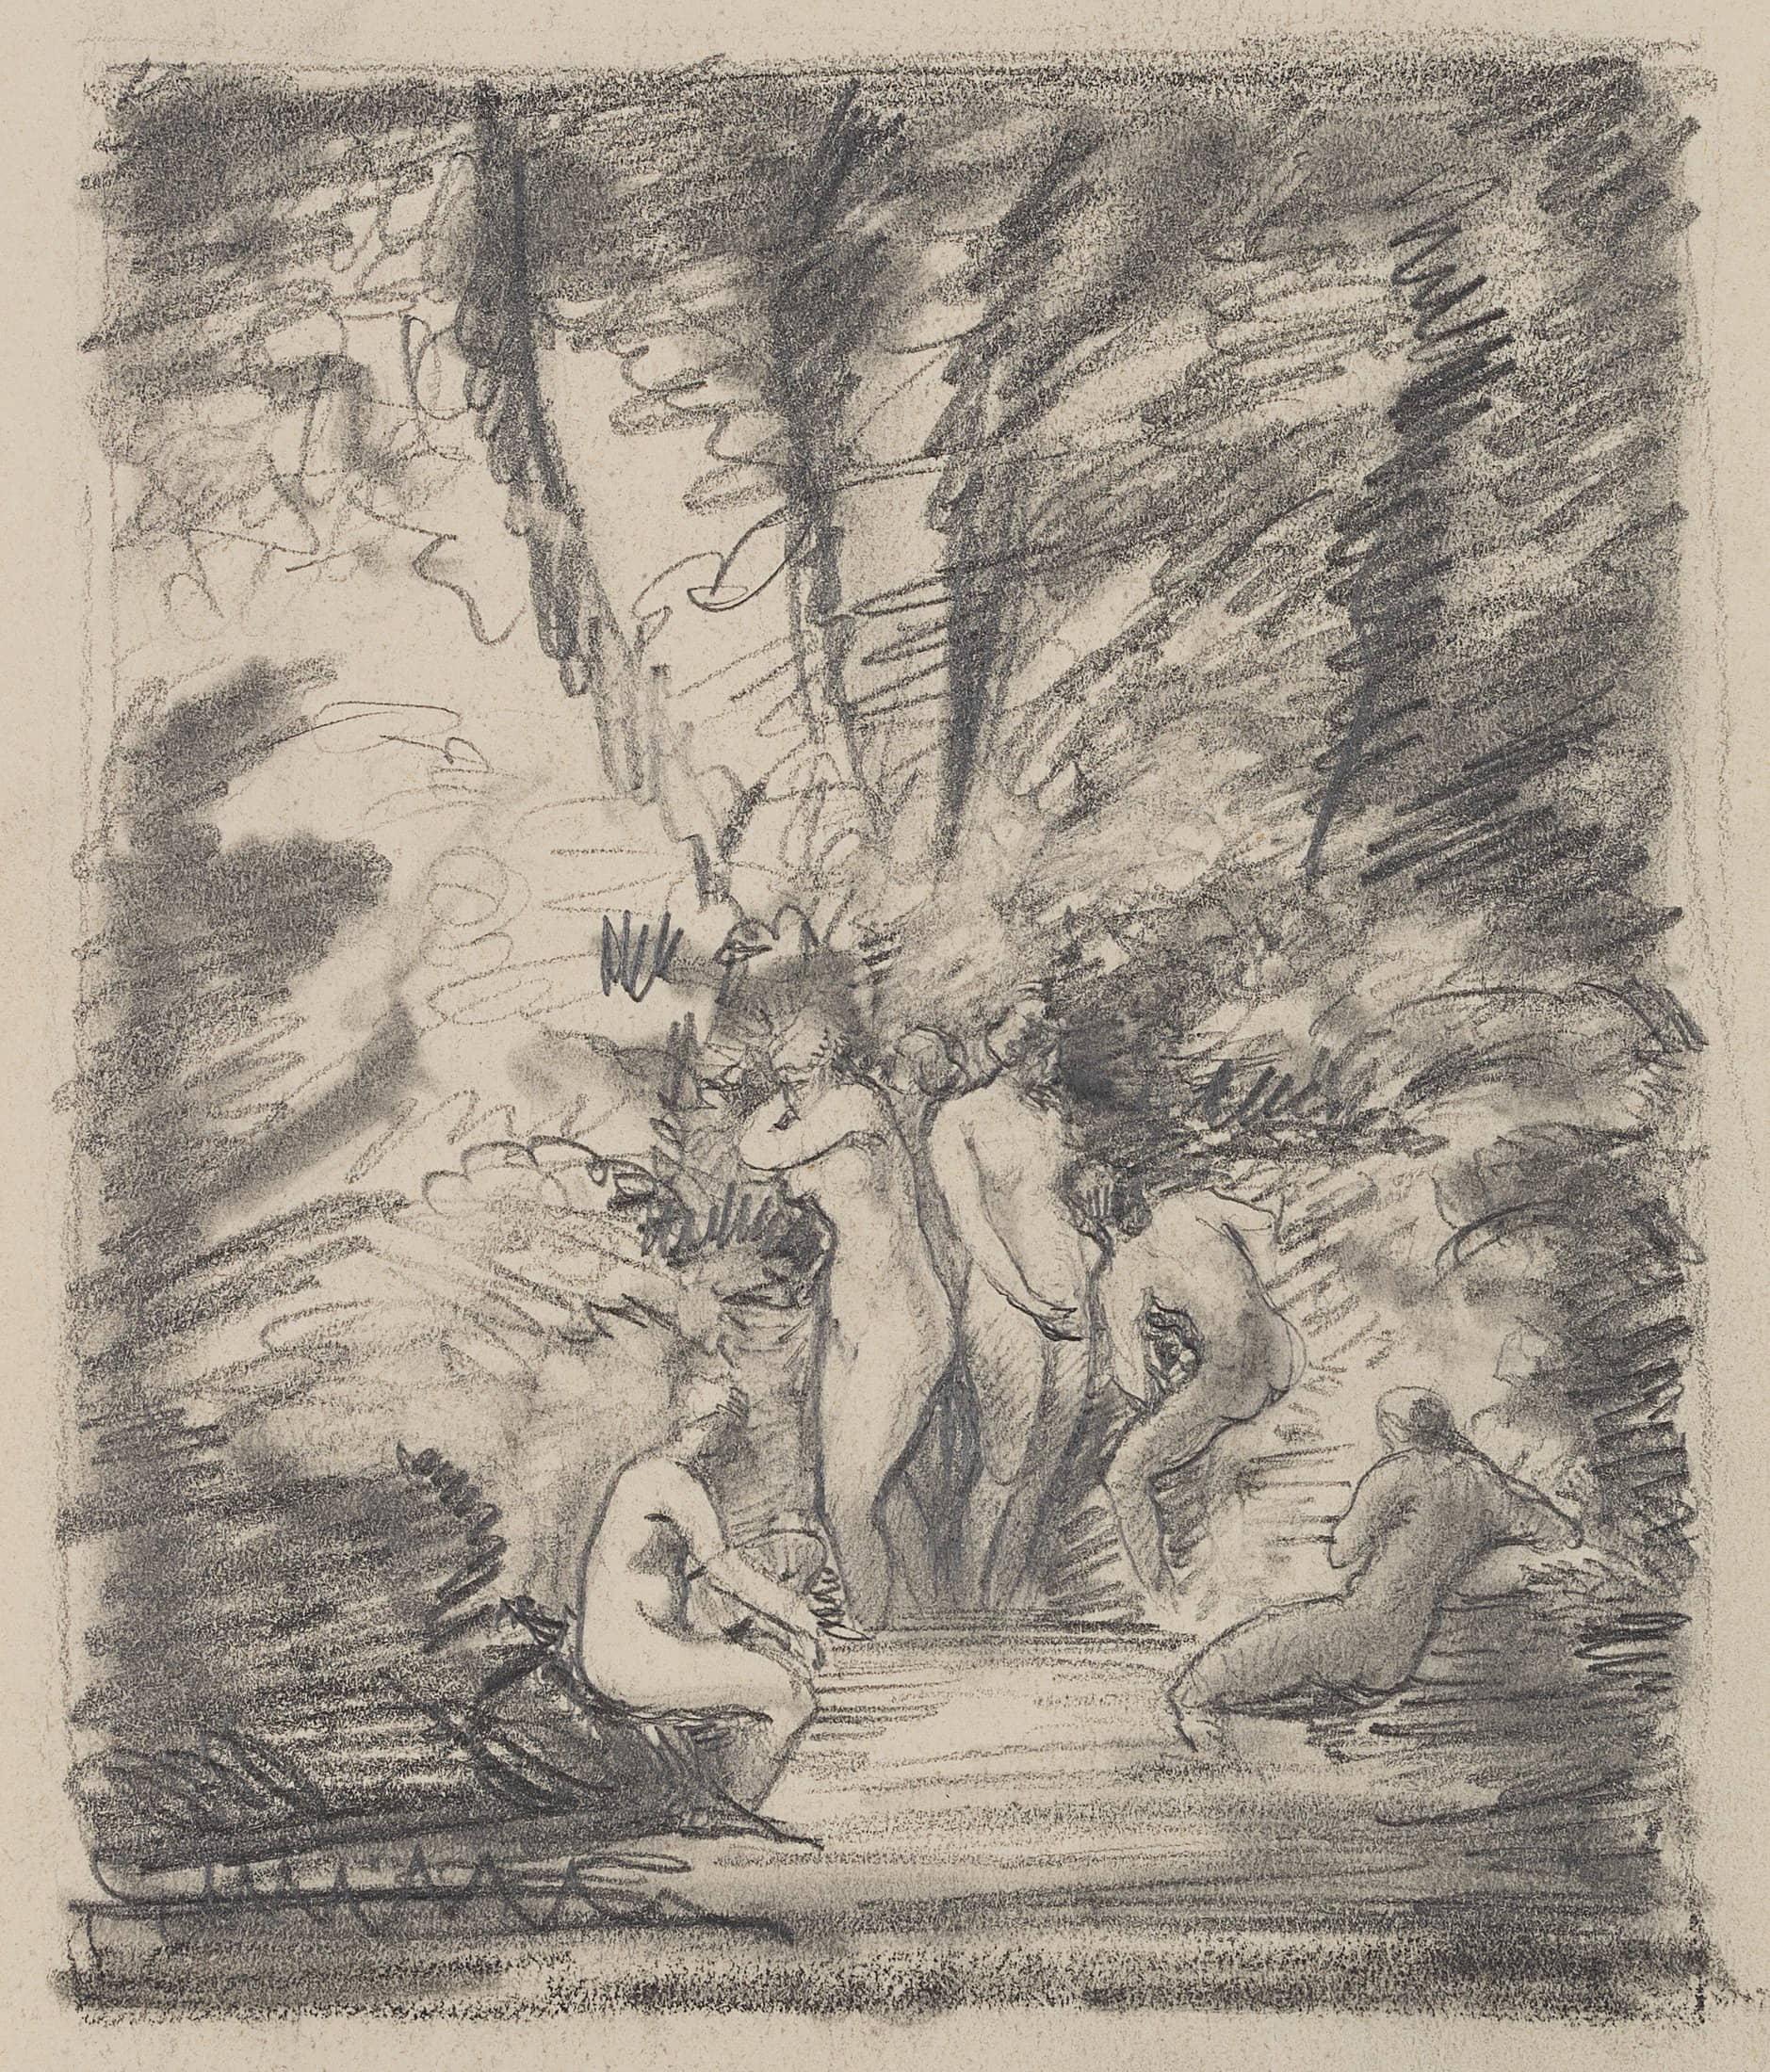 Bathers in the pond I